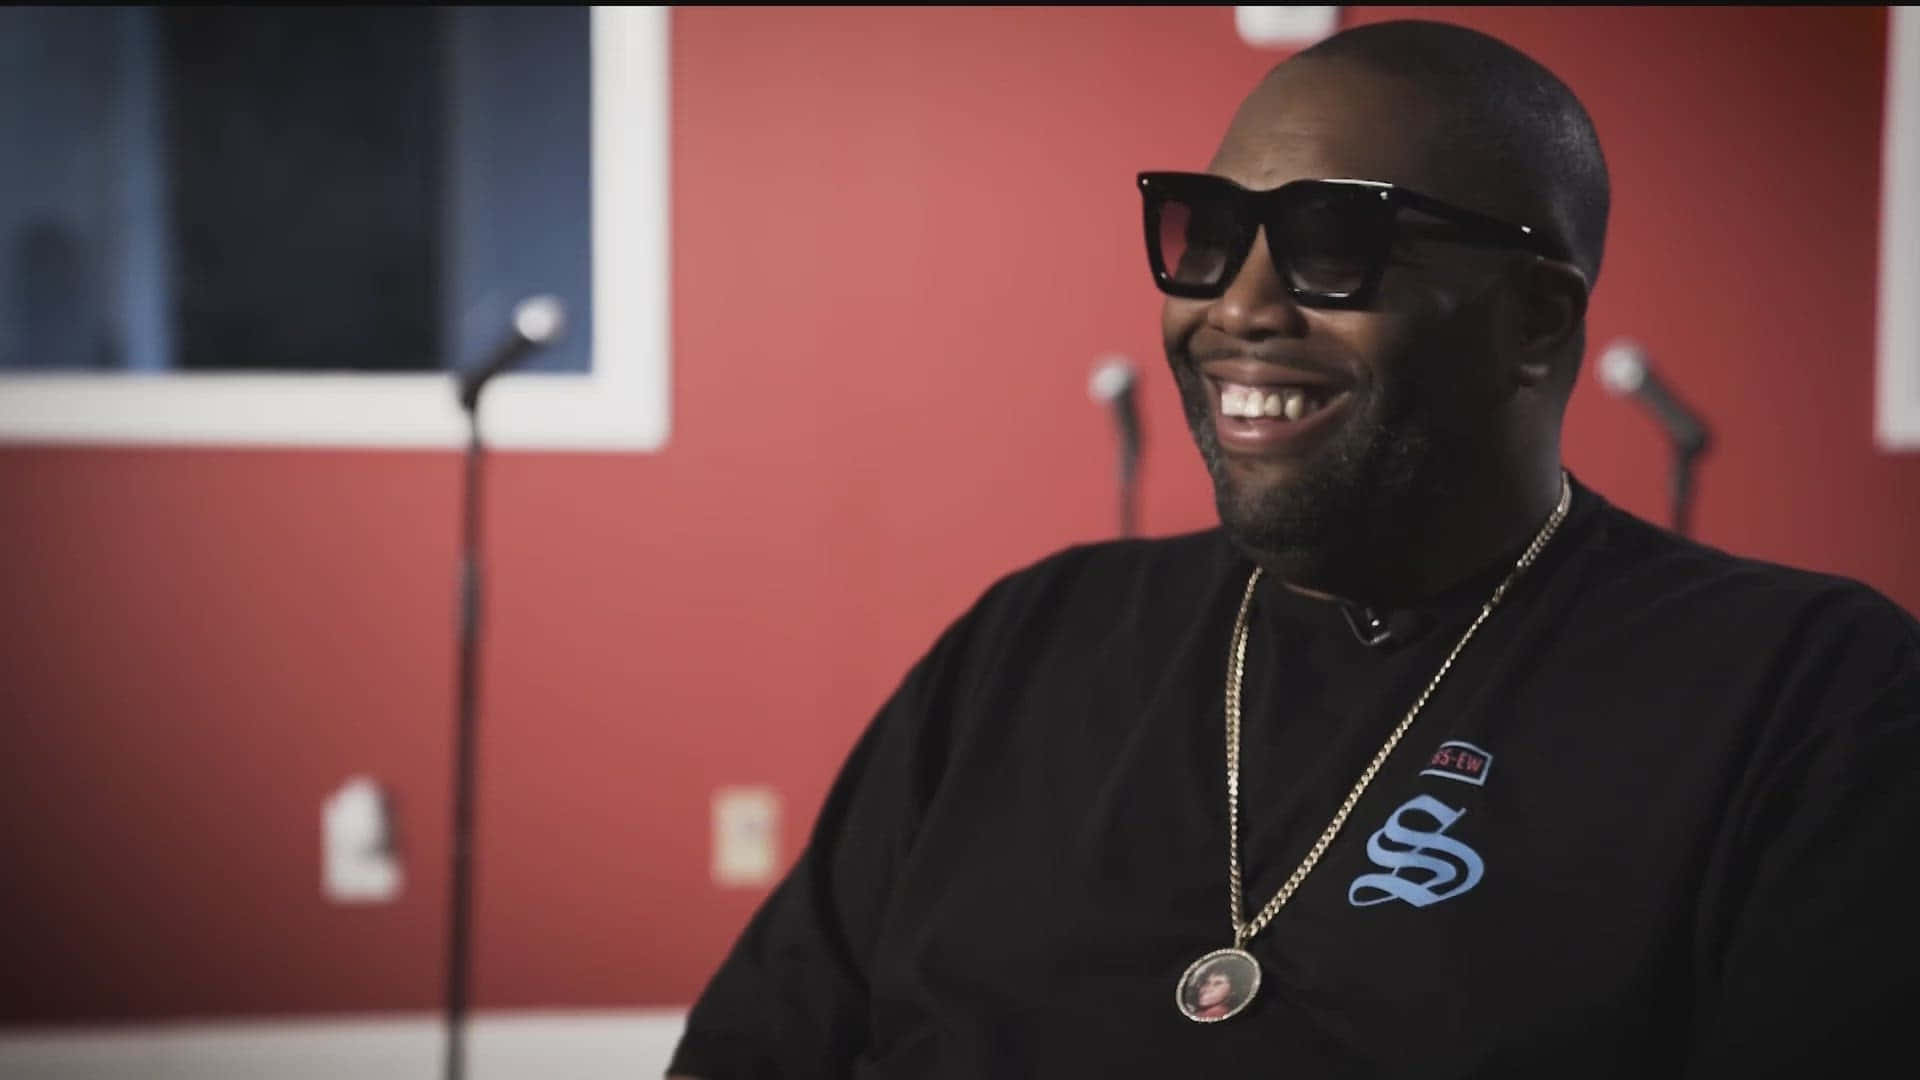 Killer Mike Smiling During Interview Wallpaper